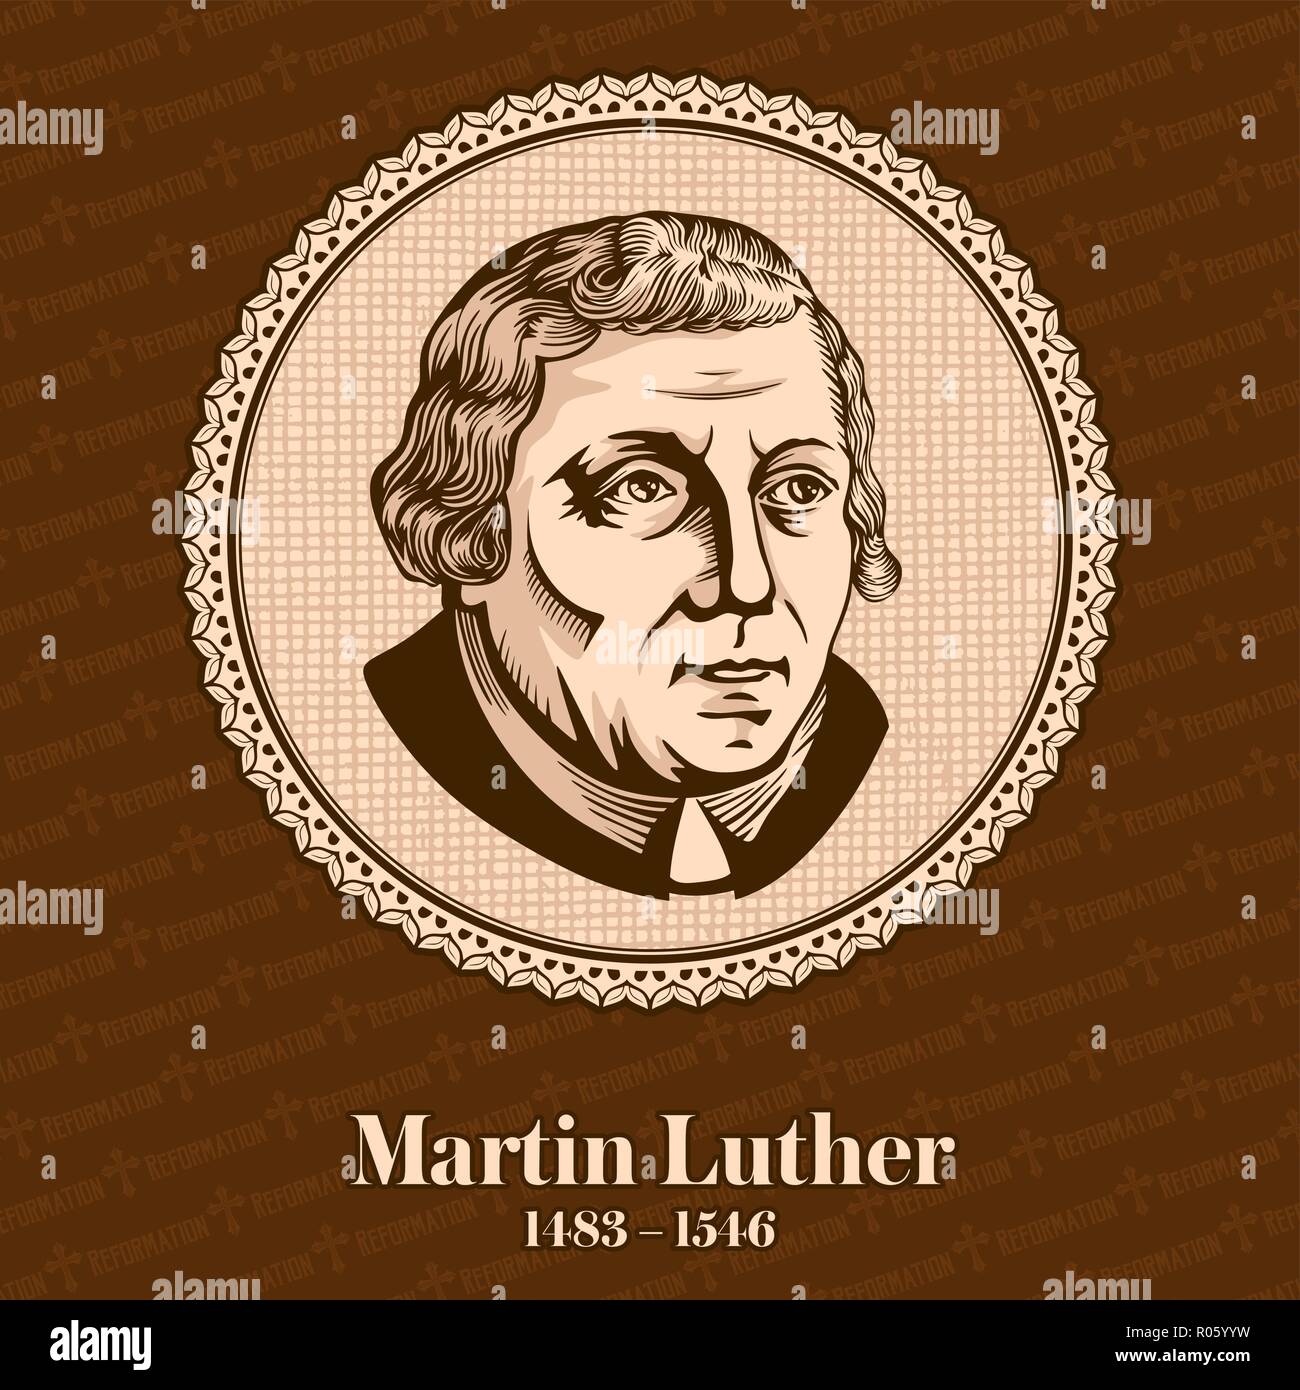 Martin Luther (1483 – 1546) was a German professor of theology, composer, priest, monk, and a seminal figure in the Protestant Reformation. Stock Vector